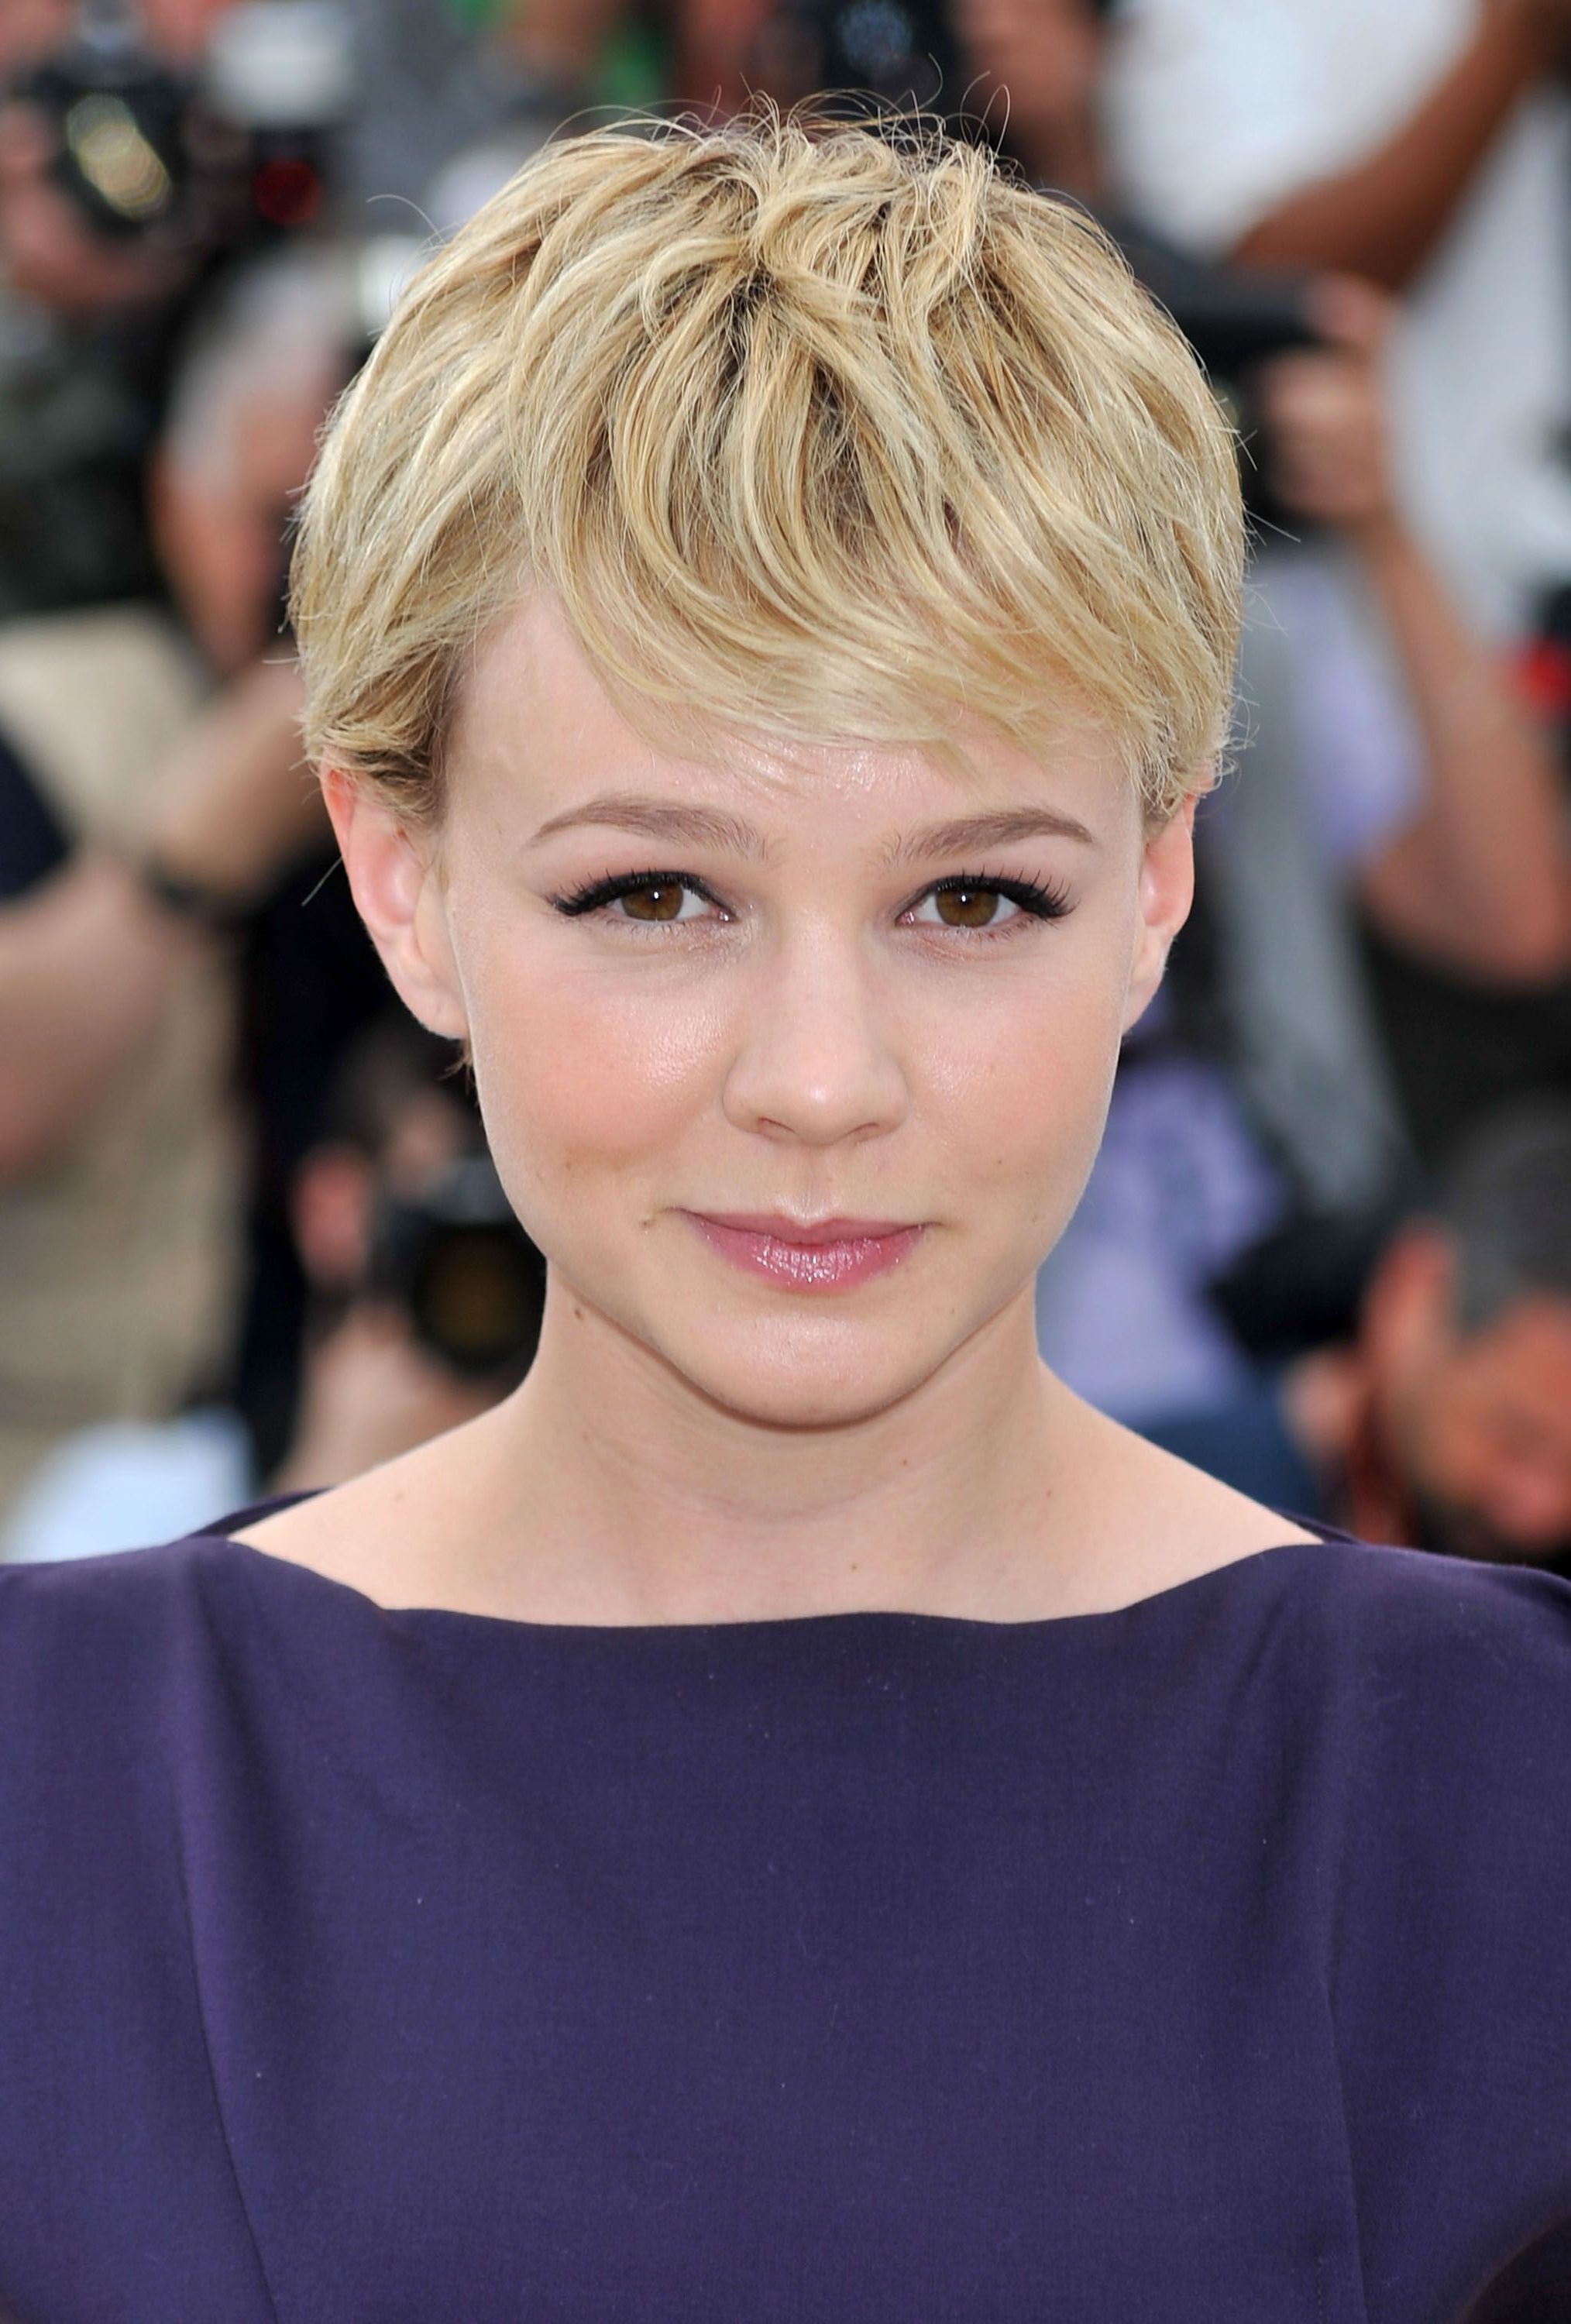 65 Best Short Hairstyles, Haircuts, And Short Hair Ideas For 2018 Intended For Short Feminine Hairstyles For Fine Hair (Photo 21 of 25)